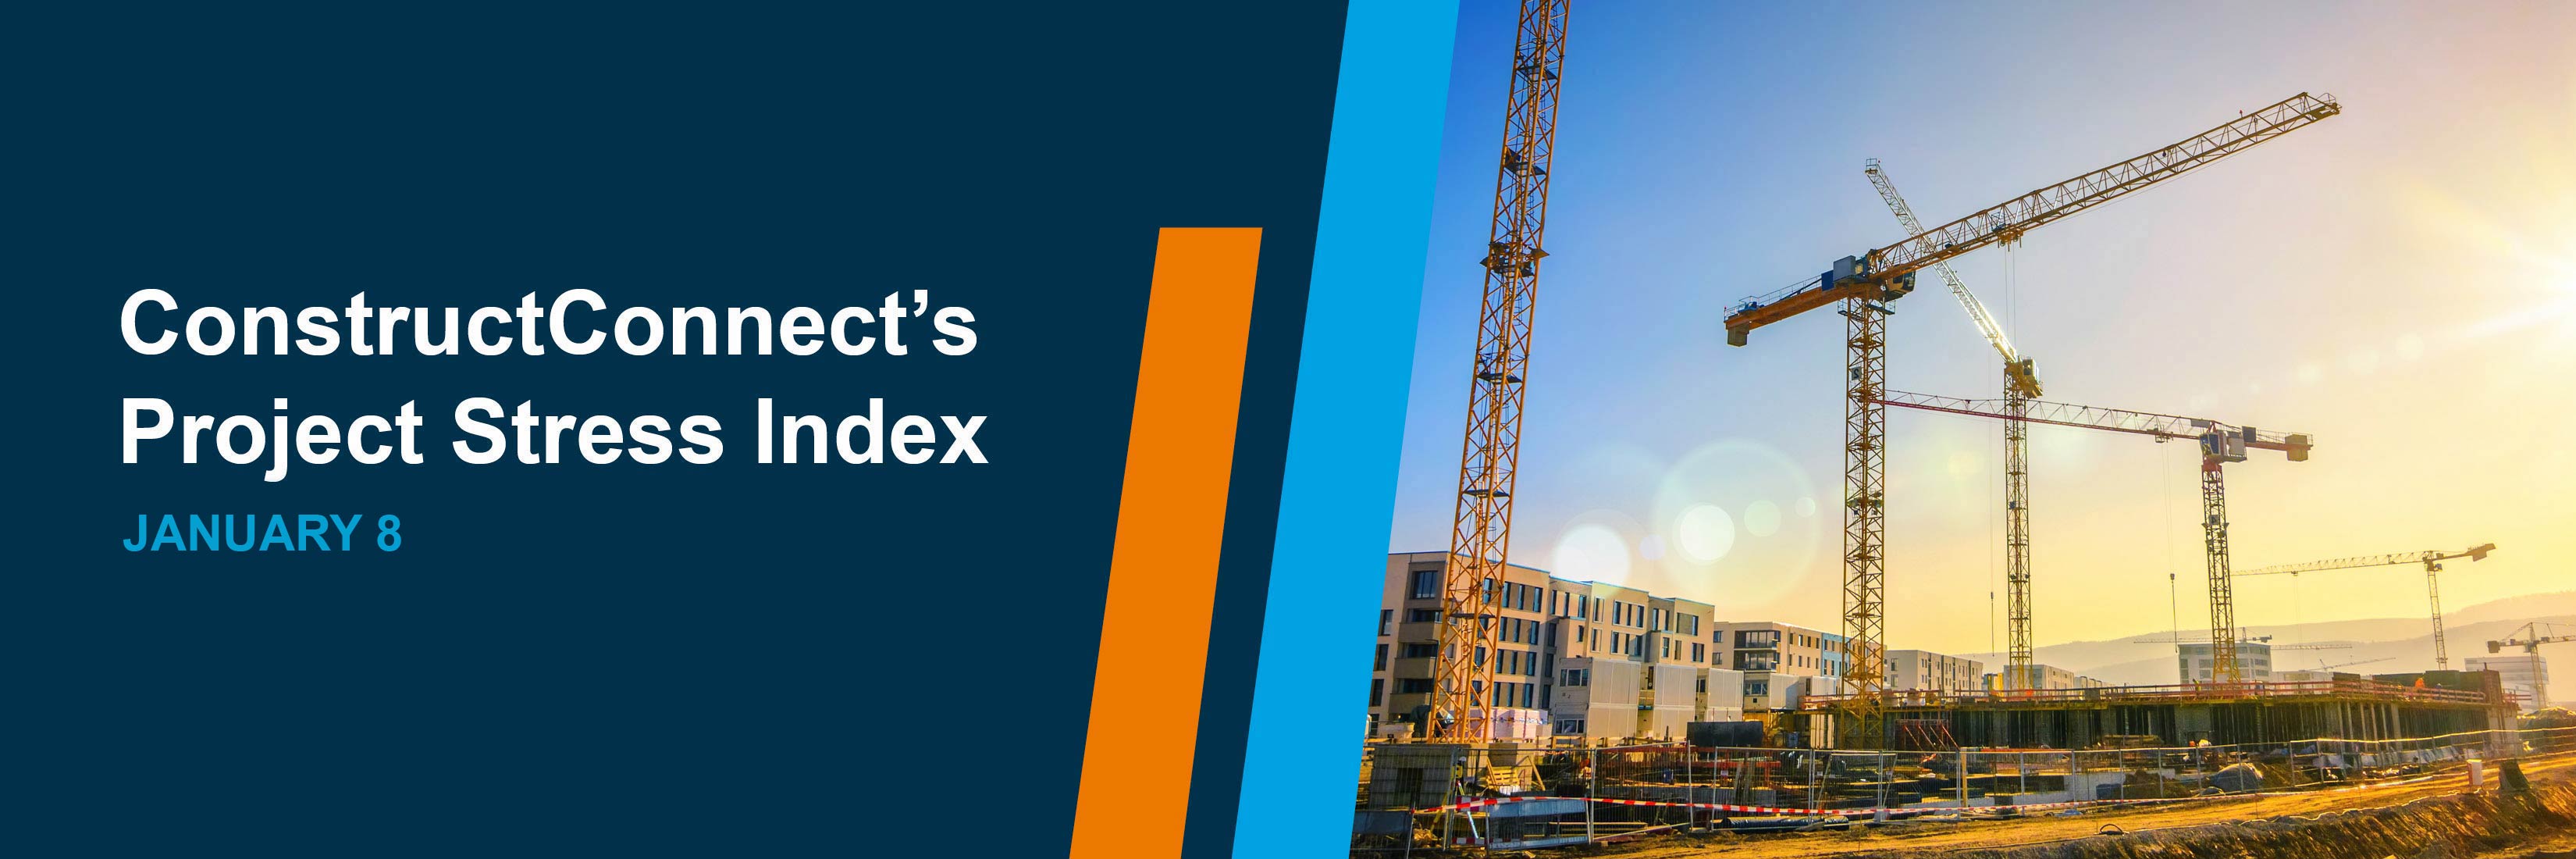 ConstructConnect's Project Stress Index - January 8